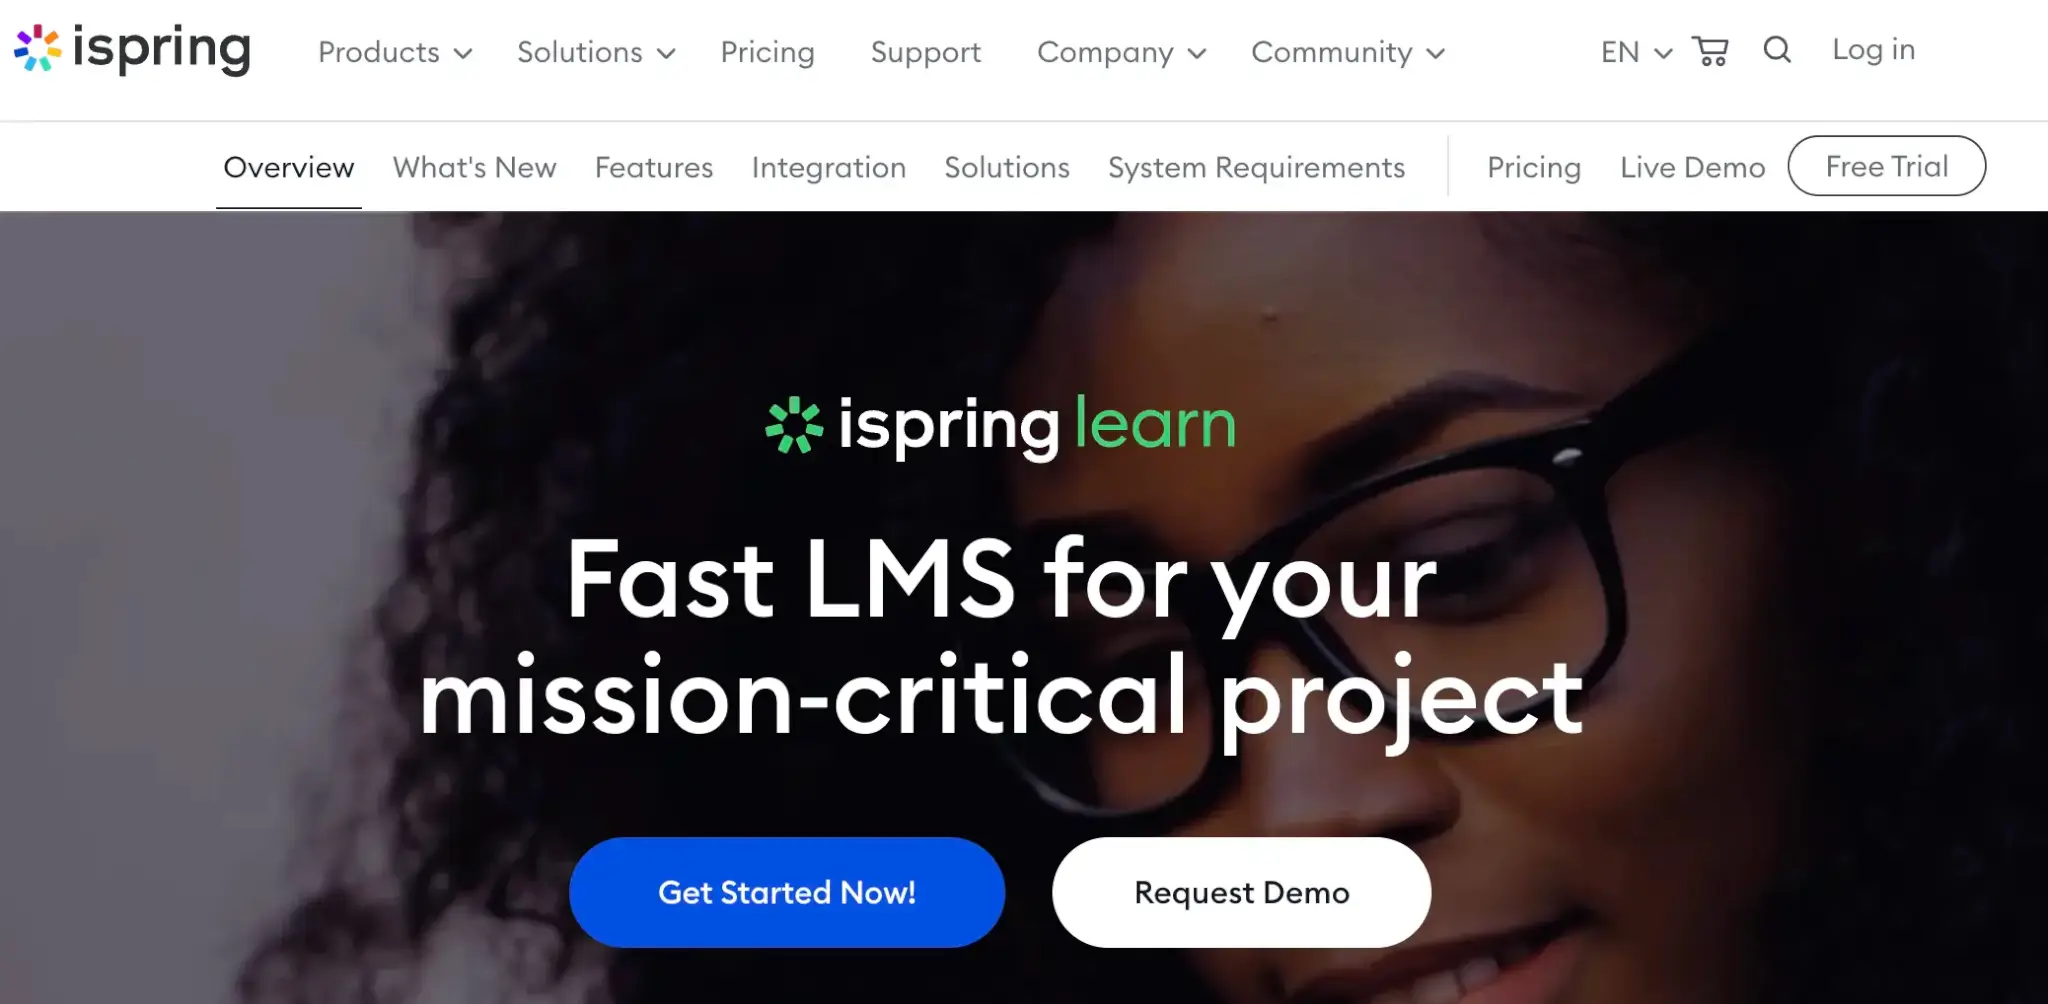 an image of the iSpring Learn landing page showing a young woman with glasses